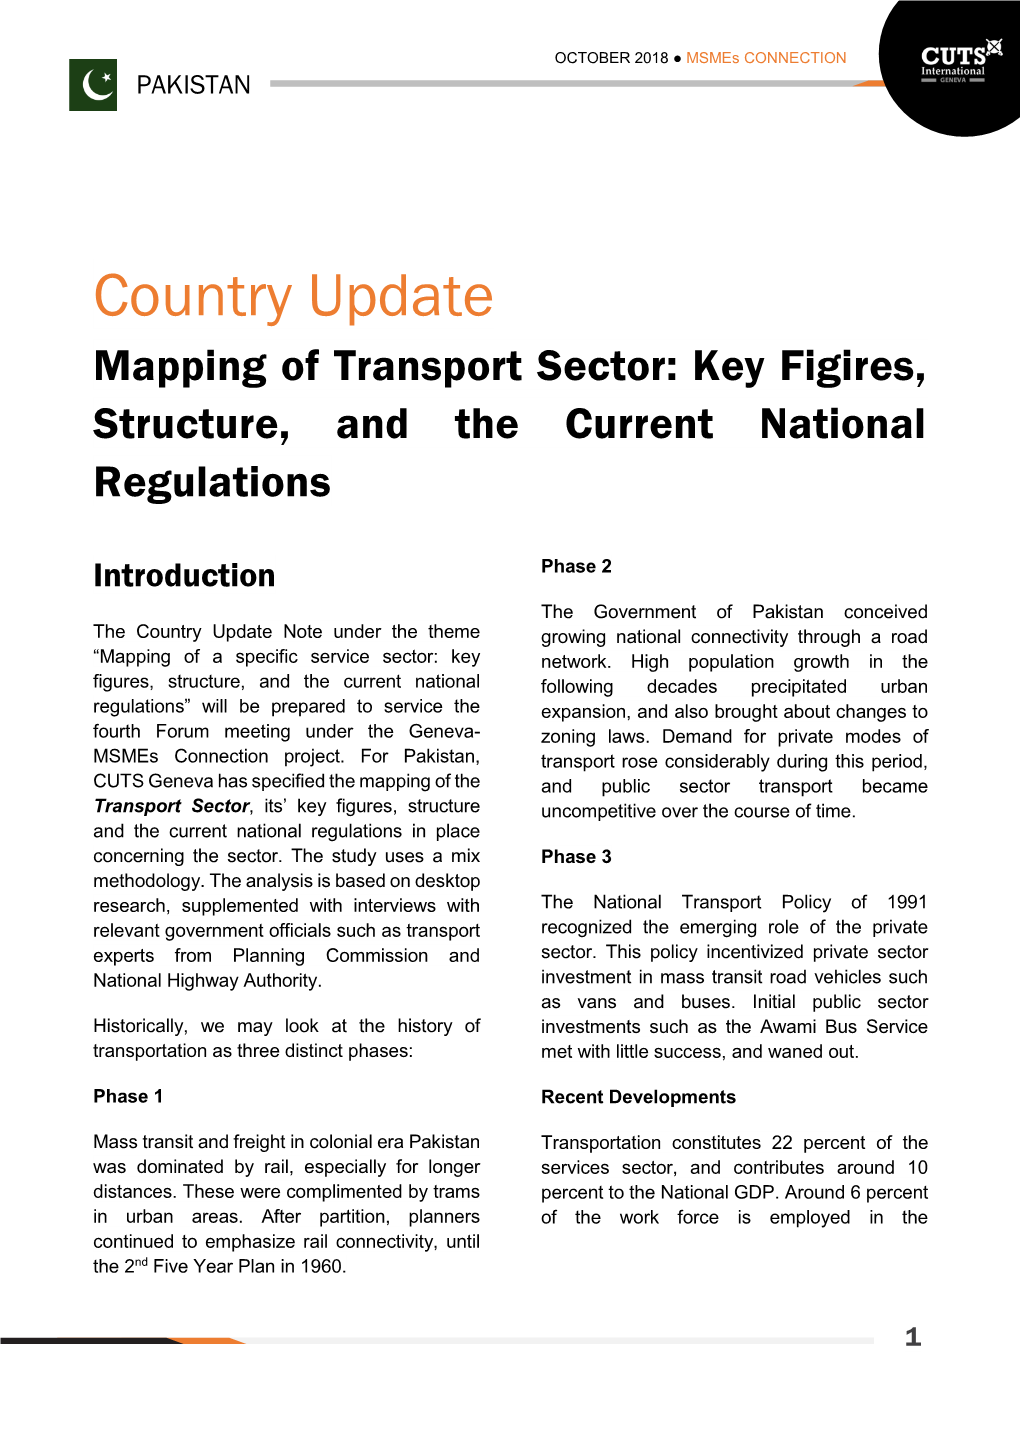 Country Update Mapping of Transport Sector: Key Figires, Structure, and the Current National Regulations